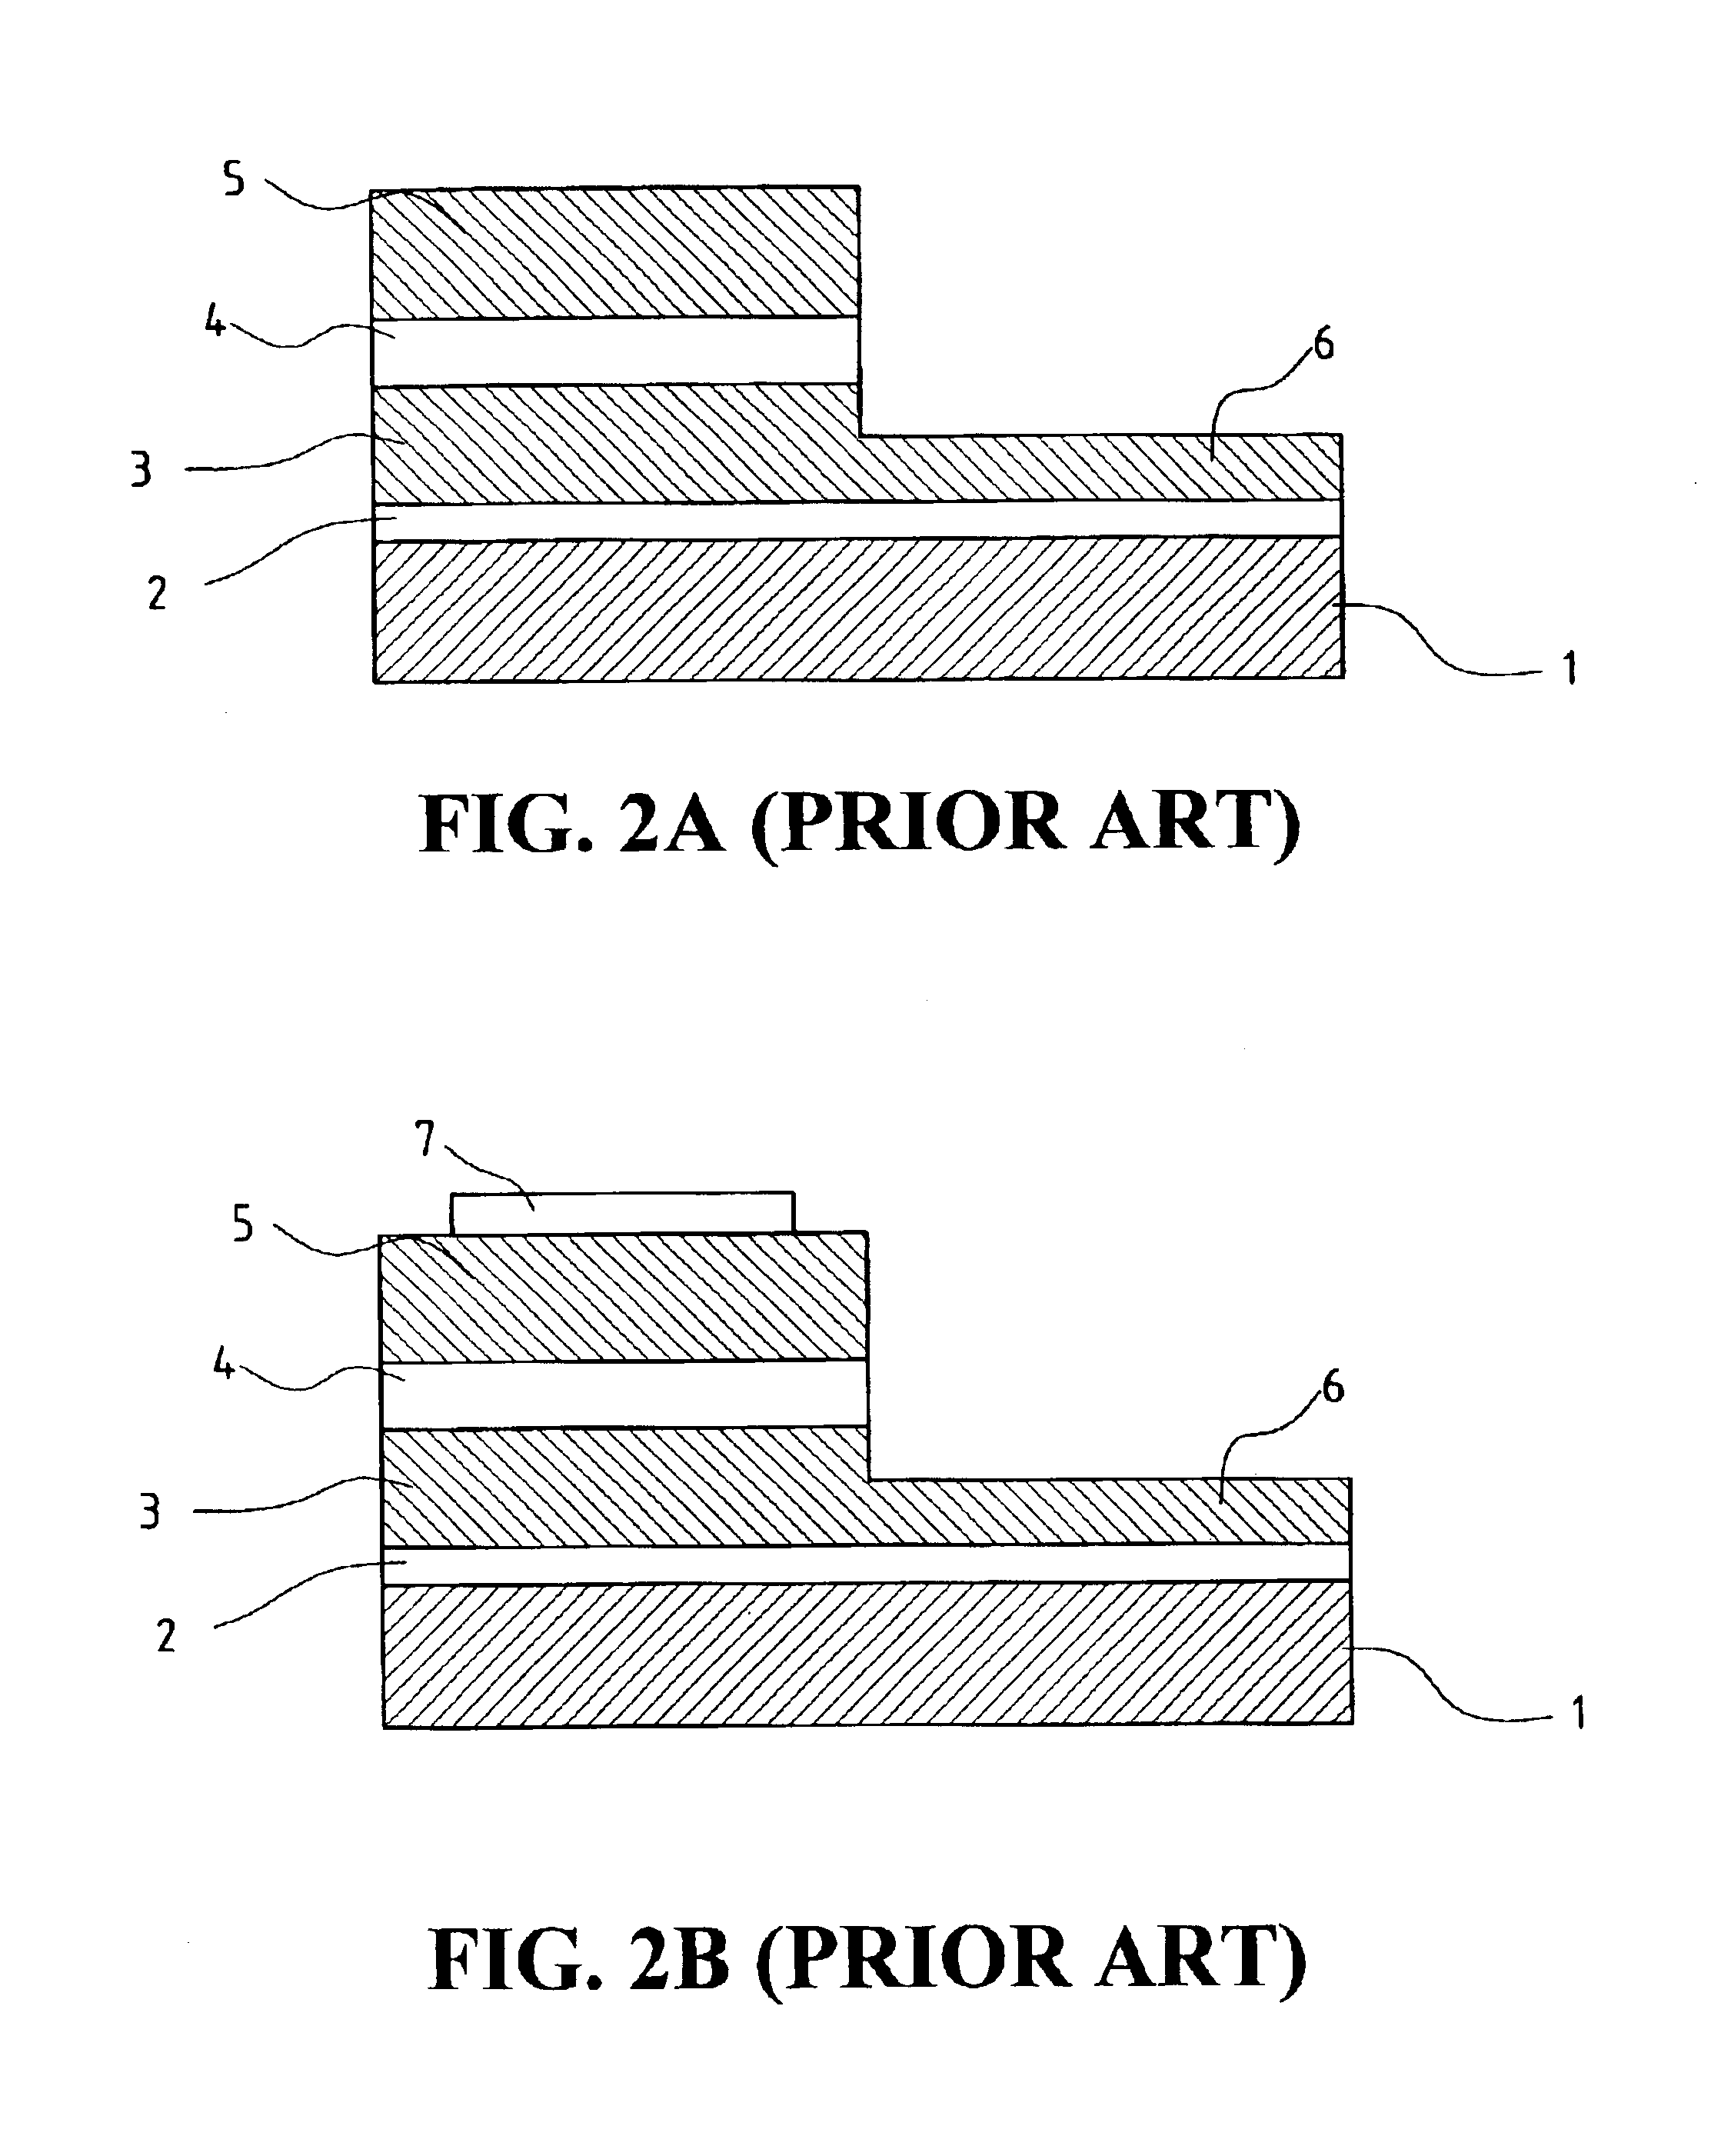 Structure and manufacturing method for GaN light emitting diodes